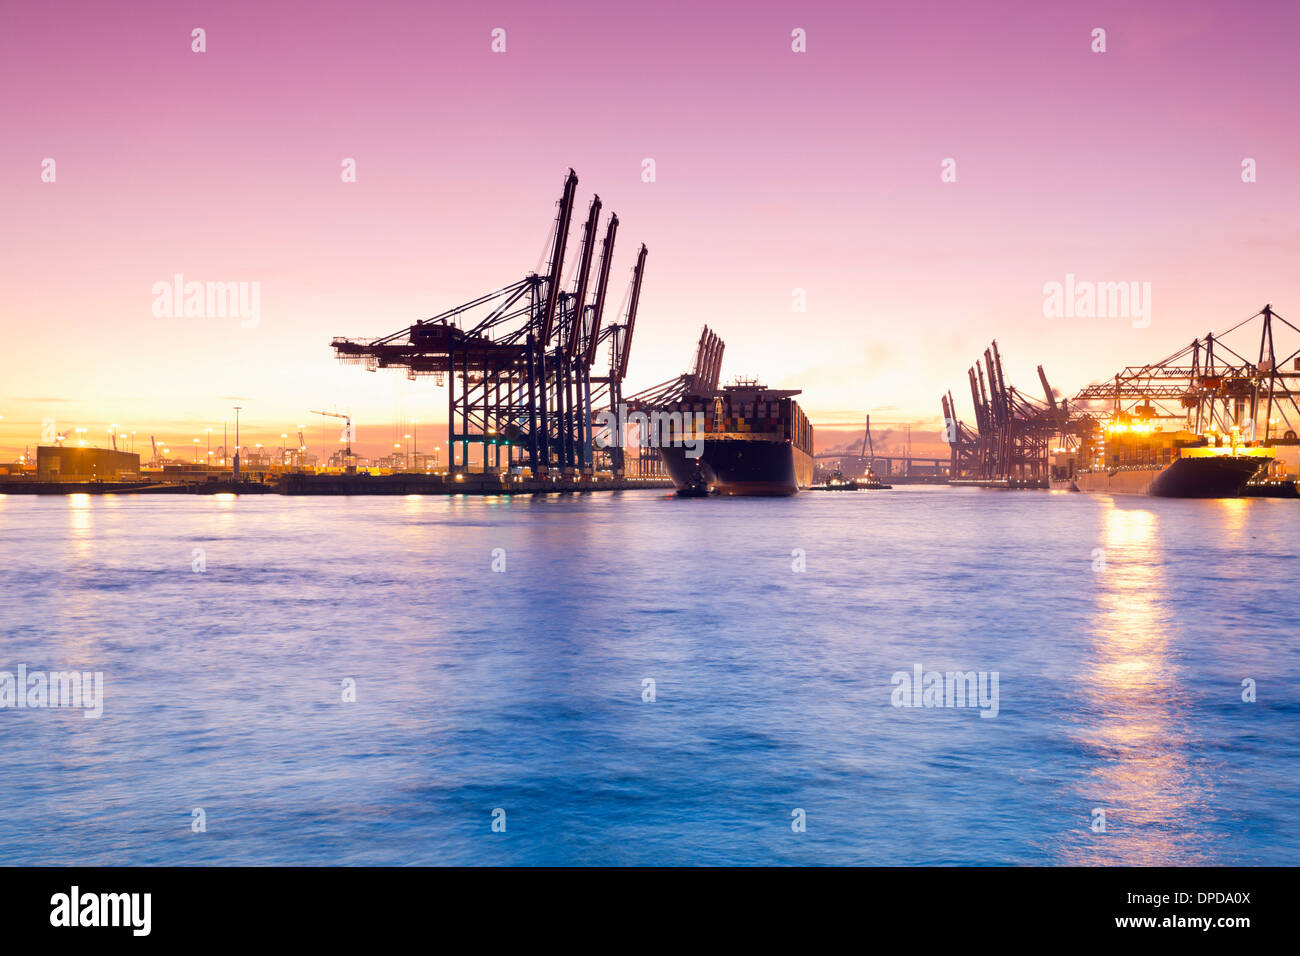 Germany, Hamburg, Parkhafen, harbour, Elbe, container ship Stock Photo